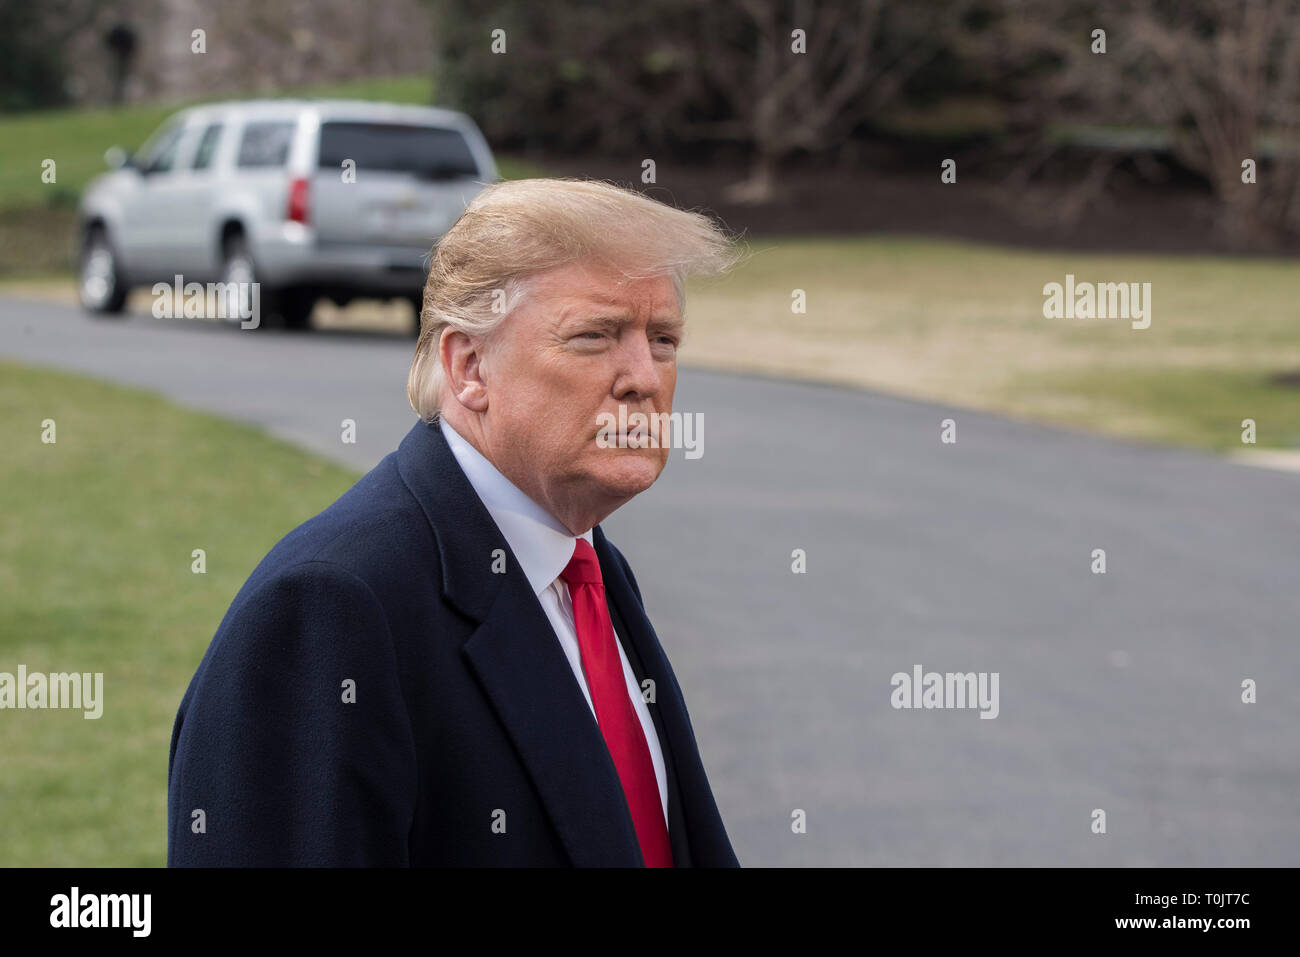 Washington DC, 20 March, 2019, USA: President Donald J Trump holds an impromptu press conference before he leaves the White House to attend a series of meeting and rallies in Ohio. He discussed the on-going conflict in Syria, complained about 'the fake news outlets' and other topics. Patsy Lynch/MediaPunch Stock Photo